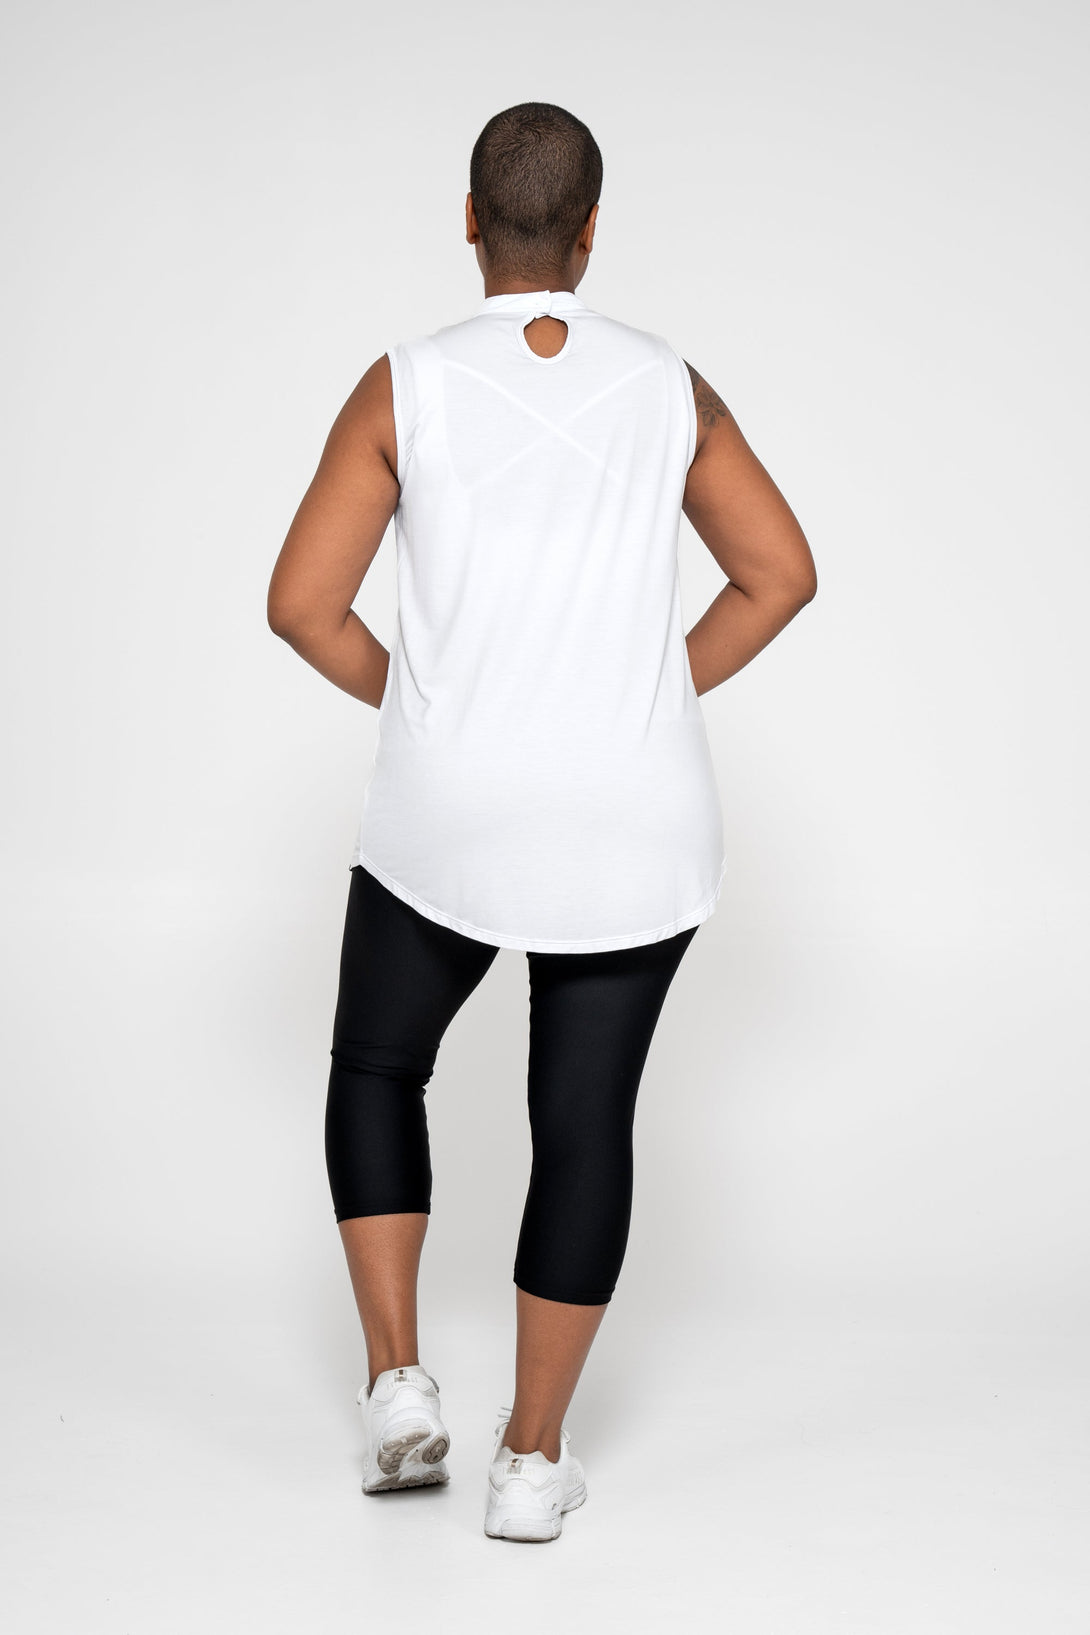 White Slinky To Touch - Ladder V Front Sleeveless Boyfriend Tee-Activewear-Exoticathletica